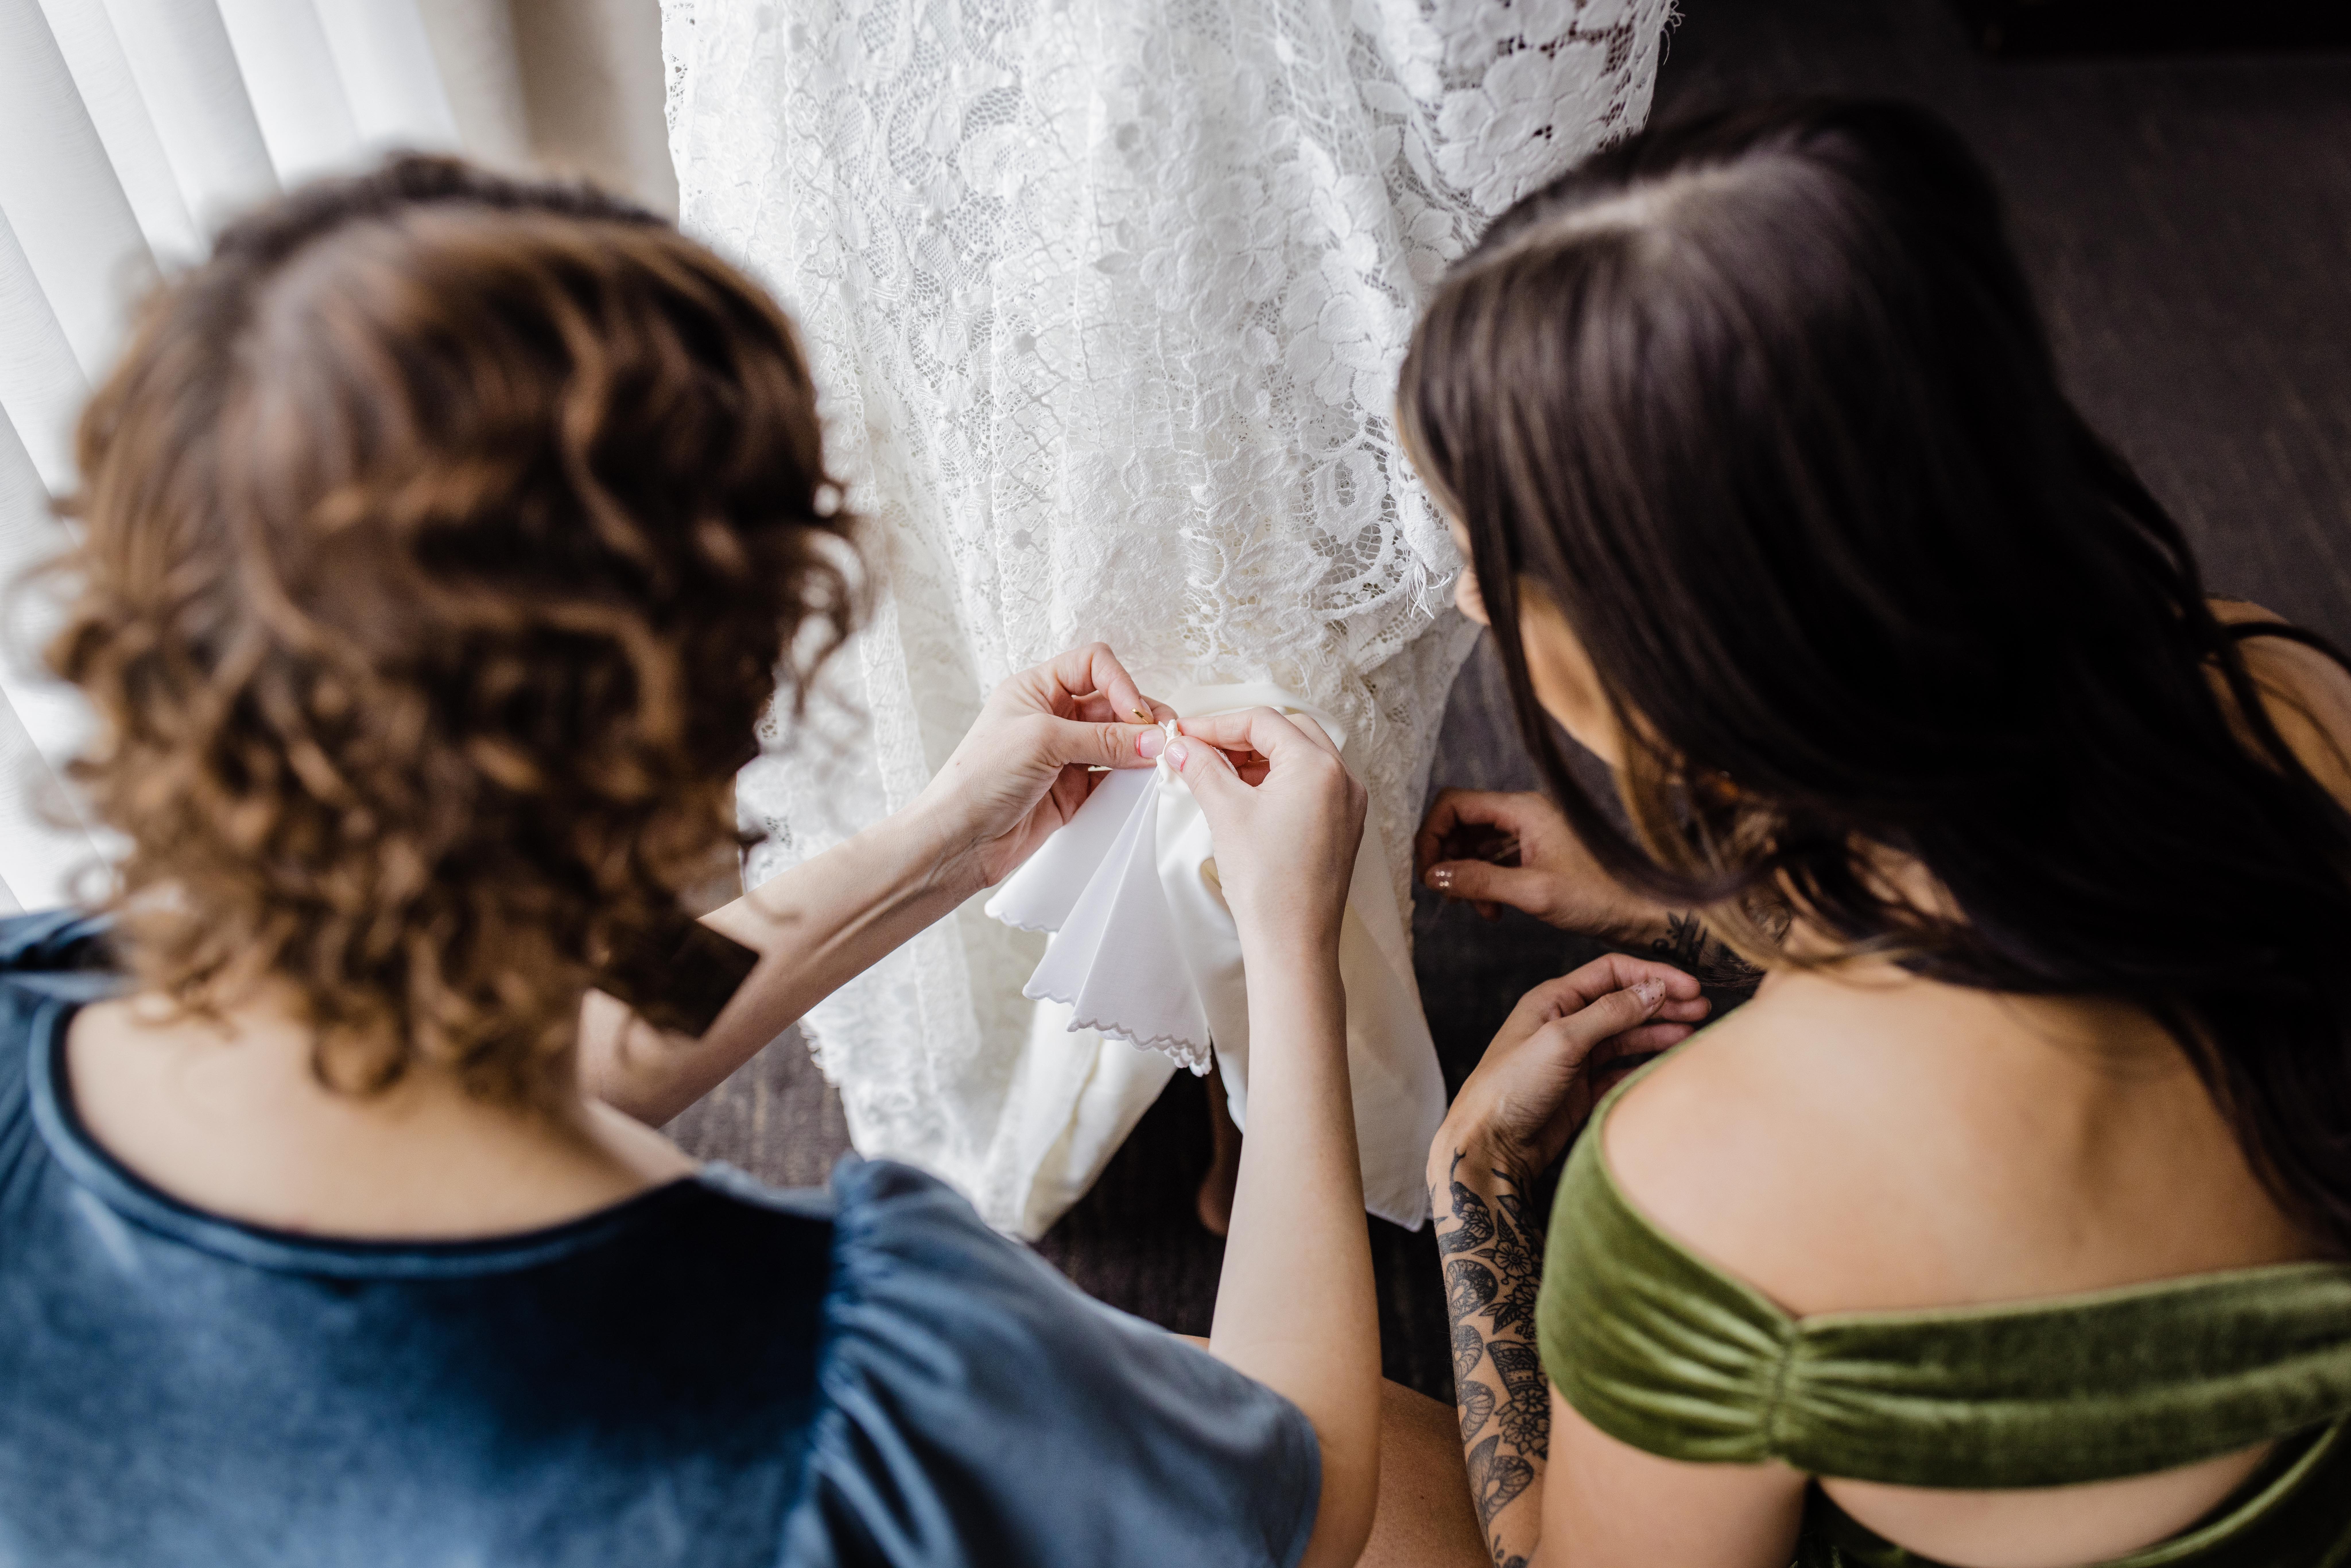 Bridesmaids sewing in something old into the bride's dress